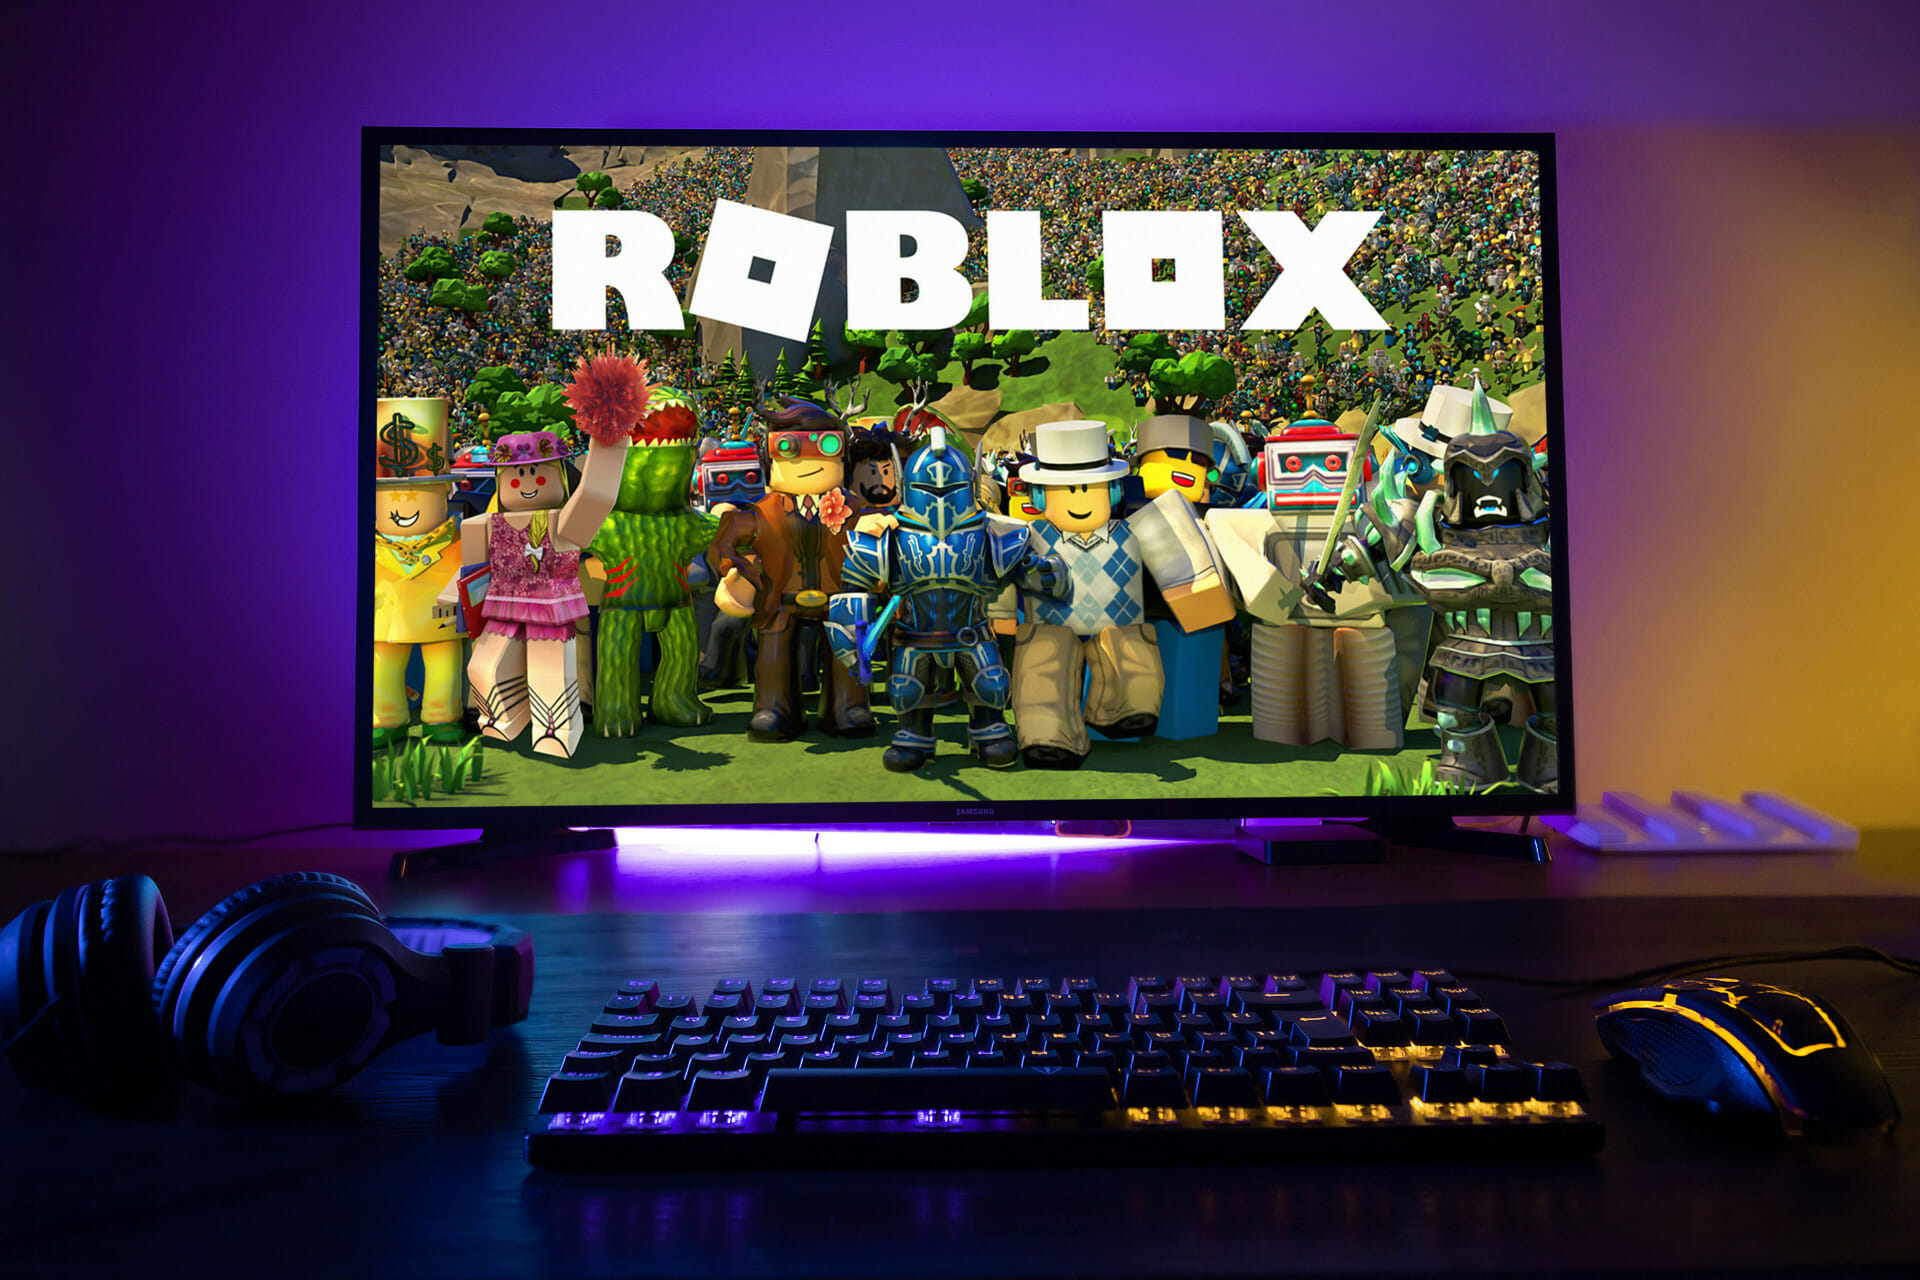 Best Roblox VPN: unblock Roblox and get access in banned countries